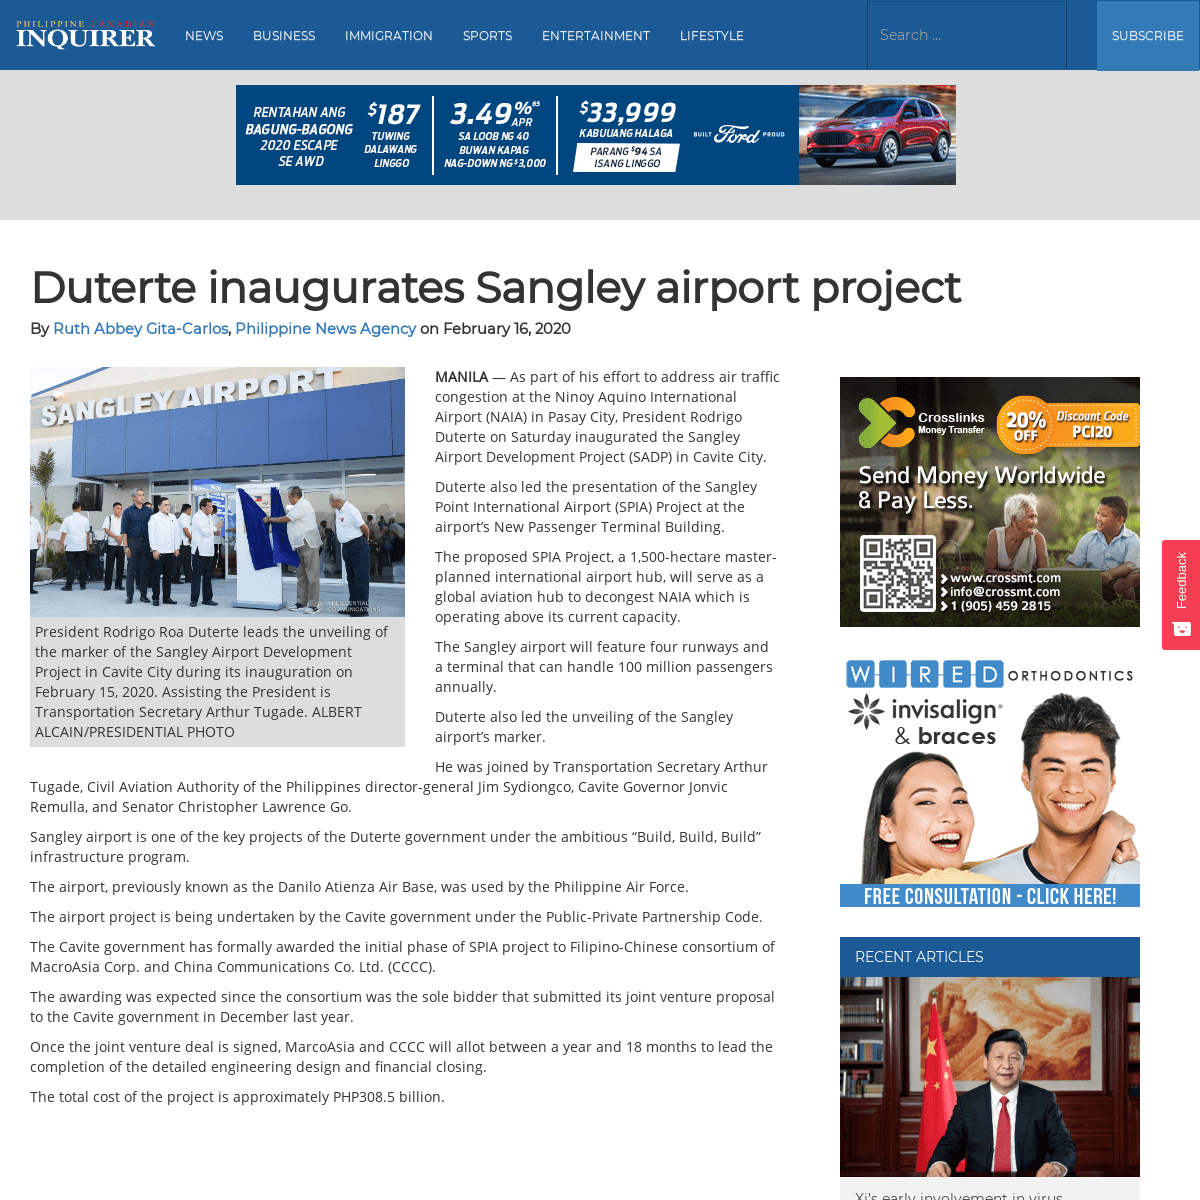 A complete backup of www.canadianinquirer.net/2020/02/16/duterte-inaugurates-sangley-airport-project/